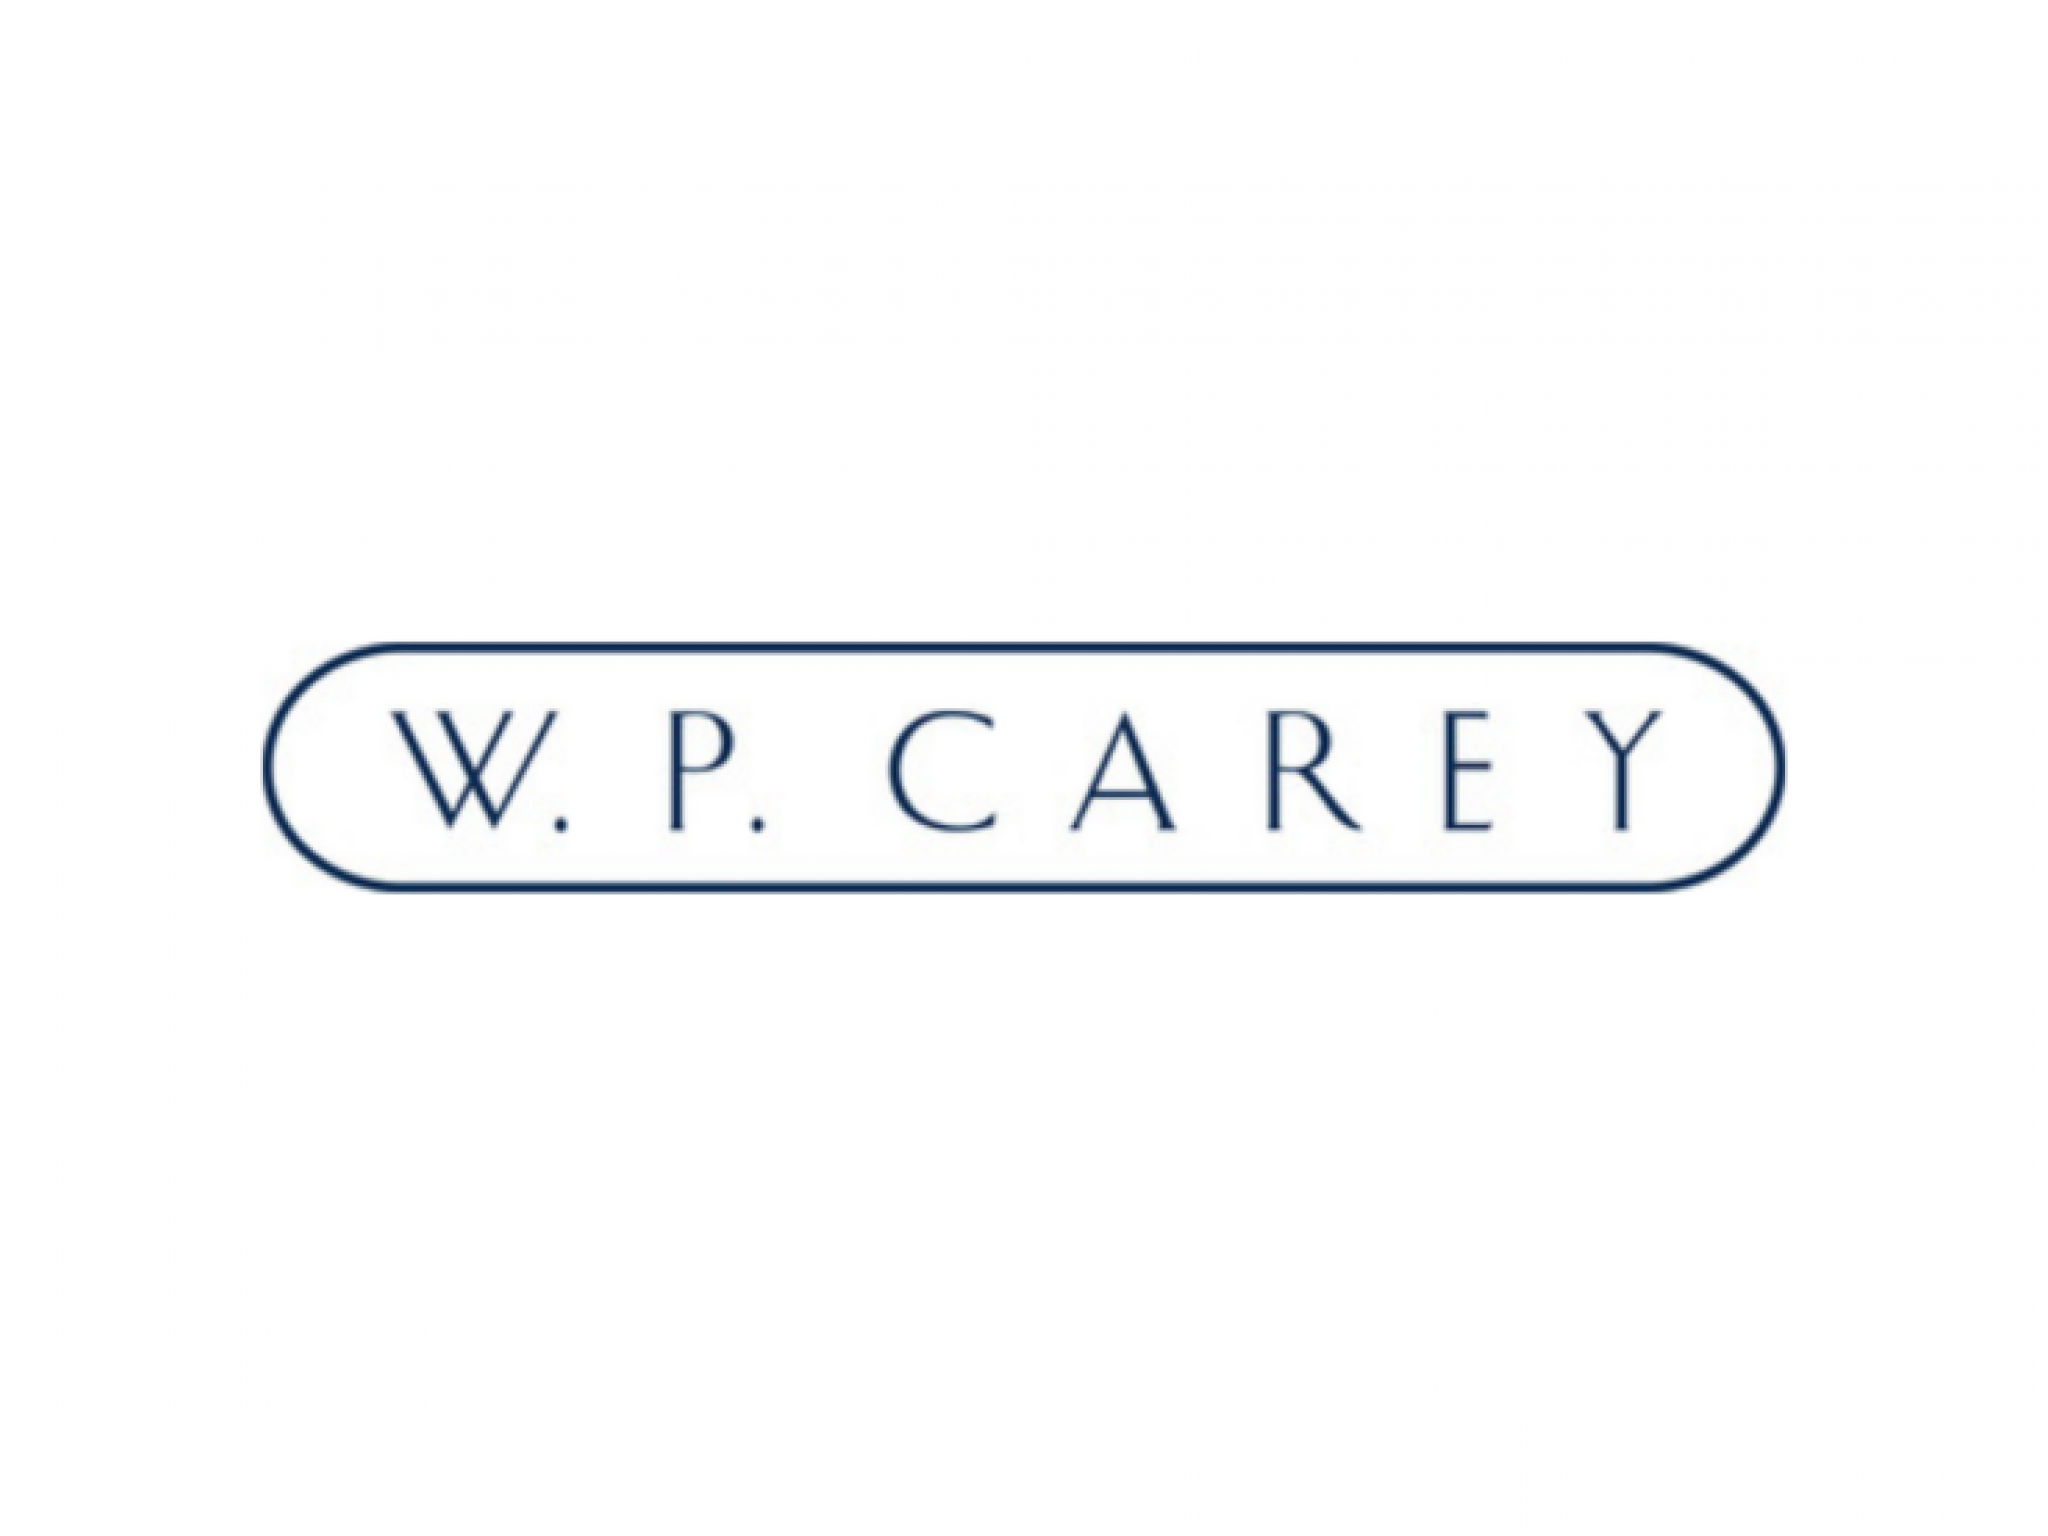  why-commercial-real-estate-company-wp-carey-shares-are-down-today 